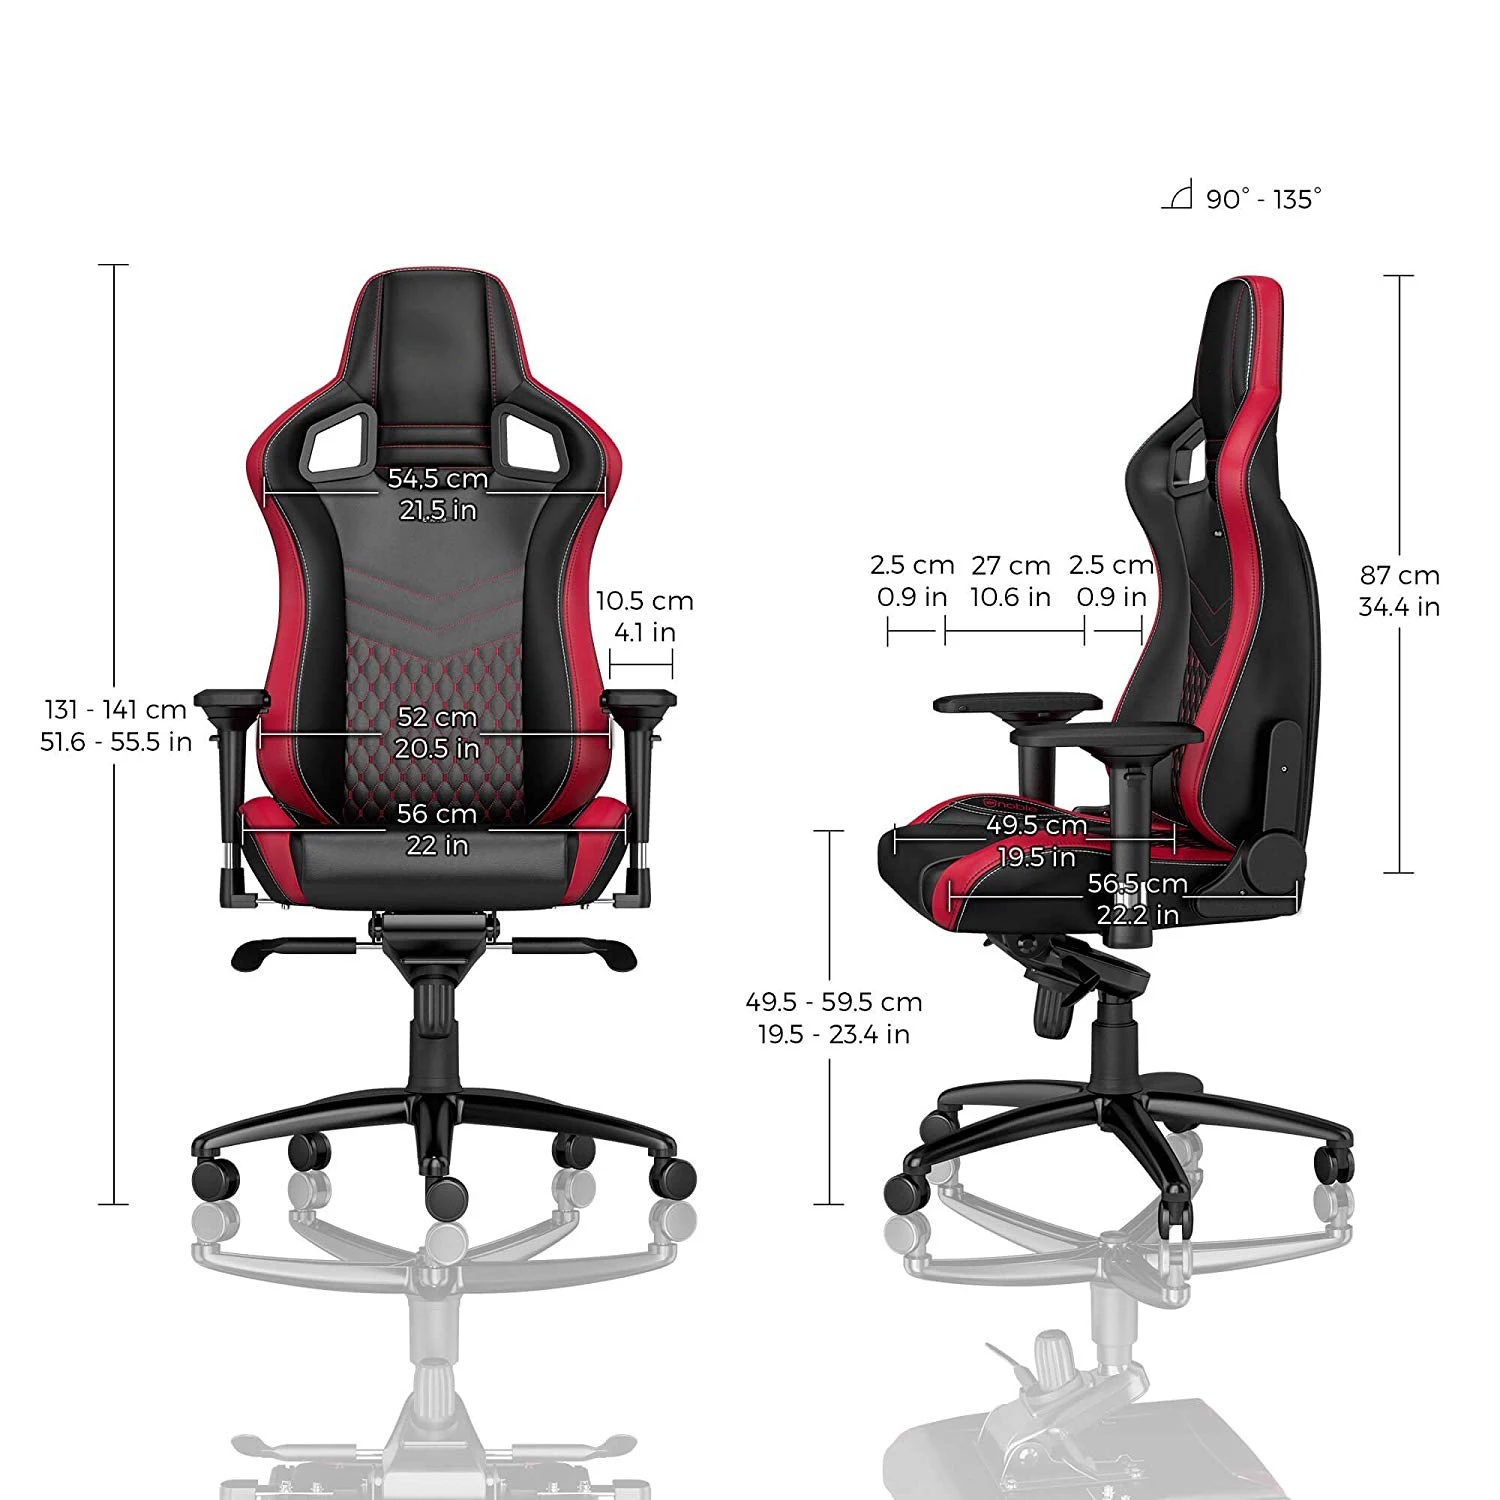 France Sourcing Source Comfortable Bureau Ergonomic Chair Gamer Oem Best Pc Gaming Racing Race Computer Pc Gamer Chair Coiffeur Buy Molded 4d Gaming Chairs With Frog Tray Workwell Gaming Chair With Metal